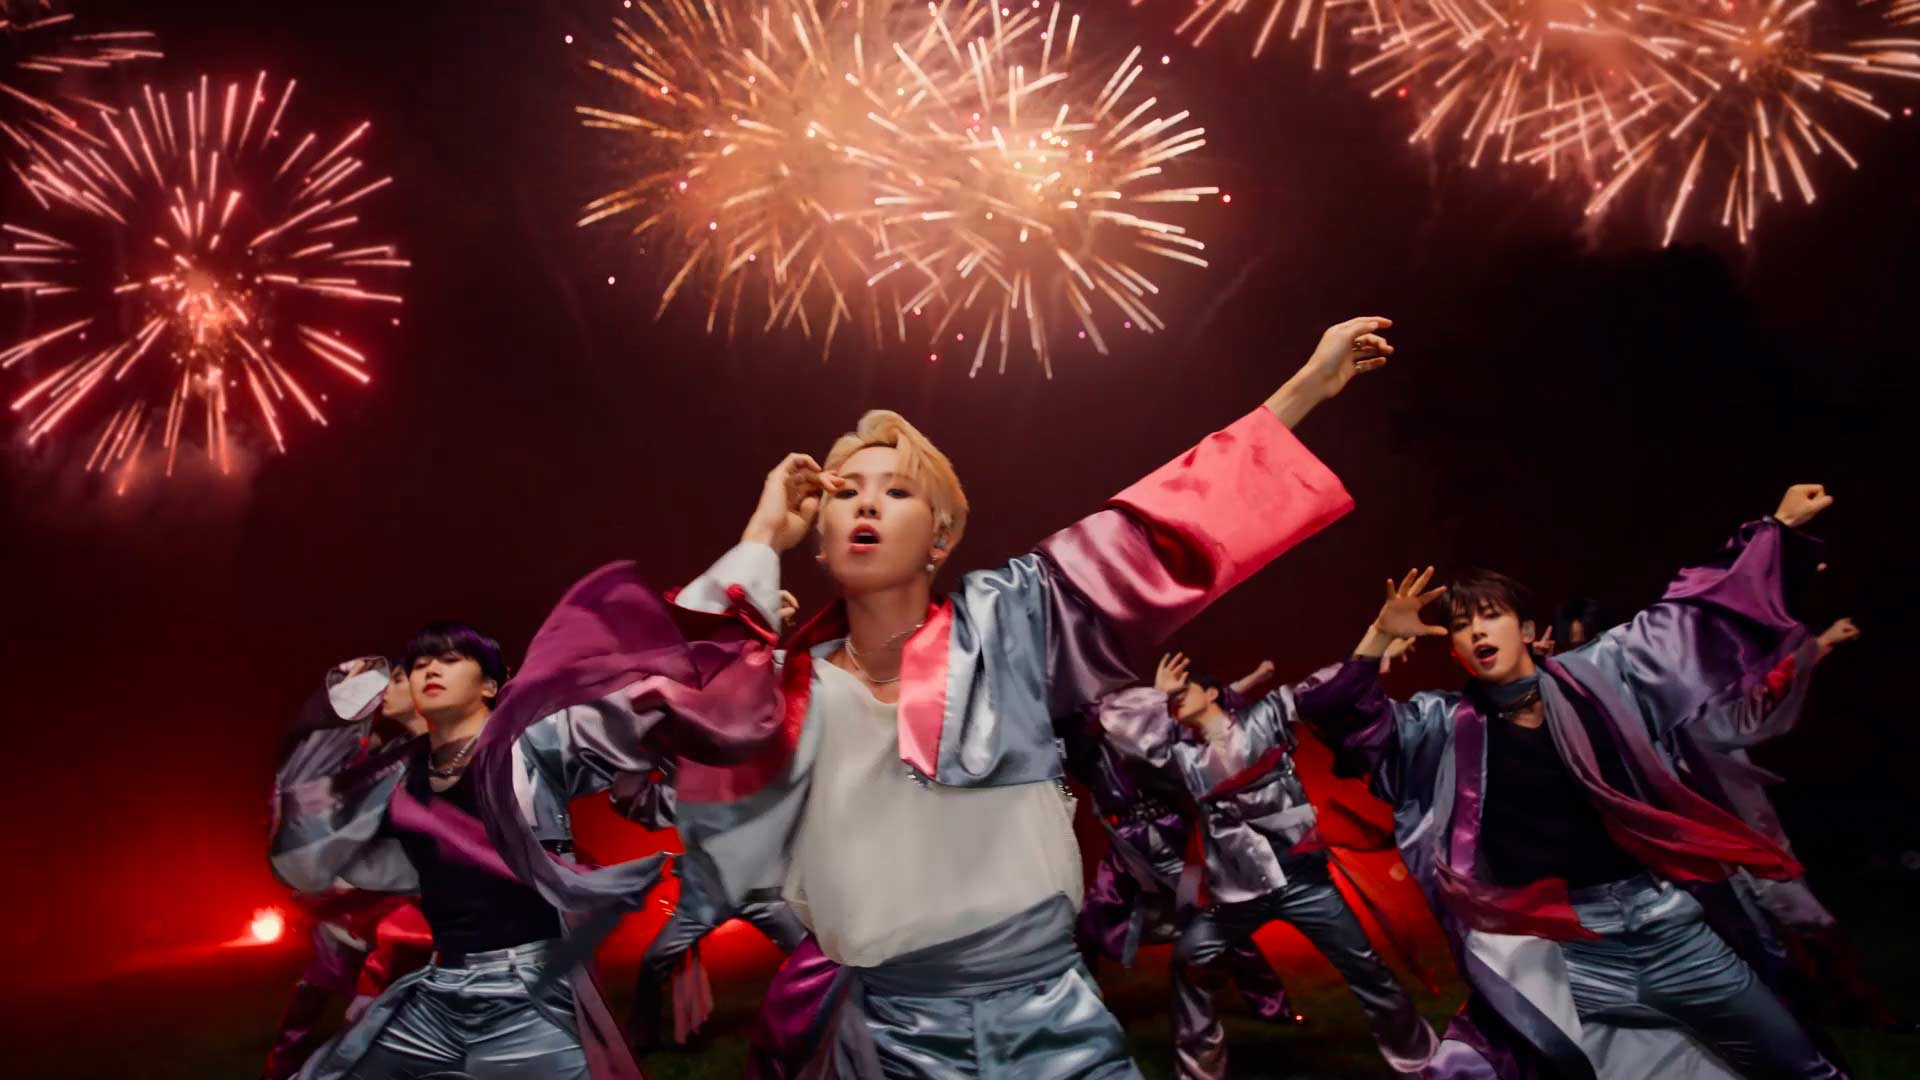 HOT JAPAN Spectacle Video「Venus × UNKAI with Fireworks」